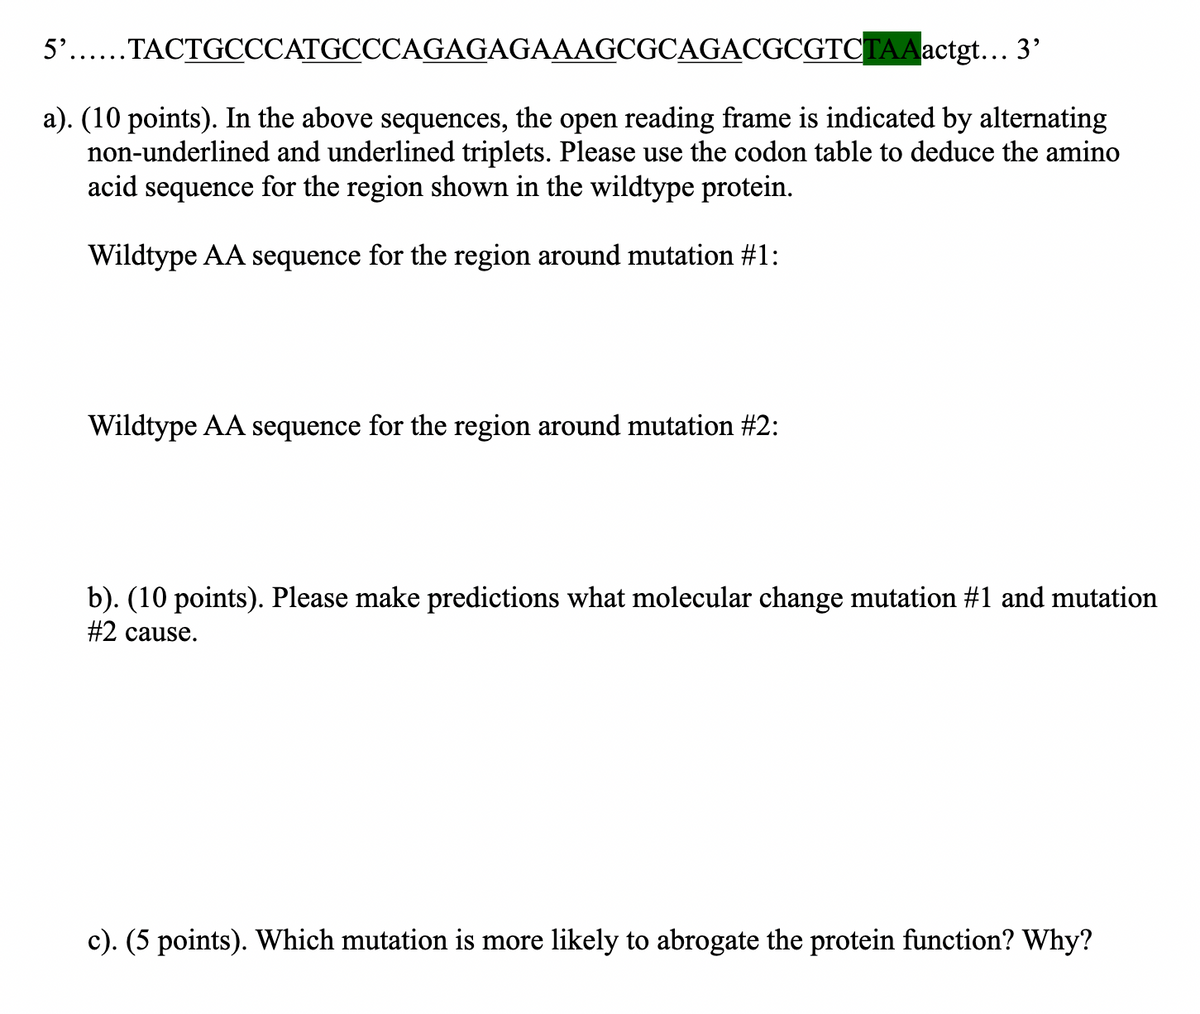 5'....TACTGCCCATGCCCAGAGAGAAAGCGCAGACGCGTCTAA actgt... 3'
a). (10 points). In the above sequences, the open reading frame is indicated by alternating
non-underlined and underlined triplets. Please use the codon table to deduce the amino
acid sequence for the region shown in the wildtype protein.
Wildtype AA sequence for the region around mutation #1:
Wildtype AA sequence for the region around mutation #2:
b). (10 points). Please make predictions what molecular change mutation #1 and mutation
#2 cause.
c). (5 points). Which mutation is more likely to abrogate the protein function? Why?